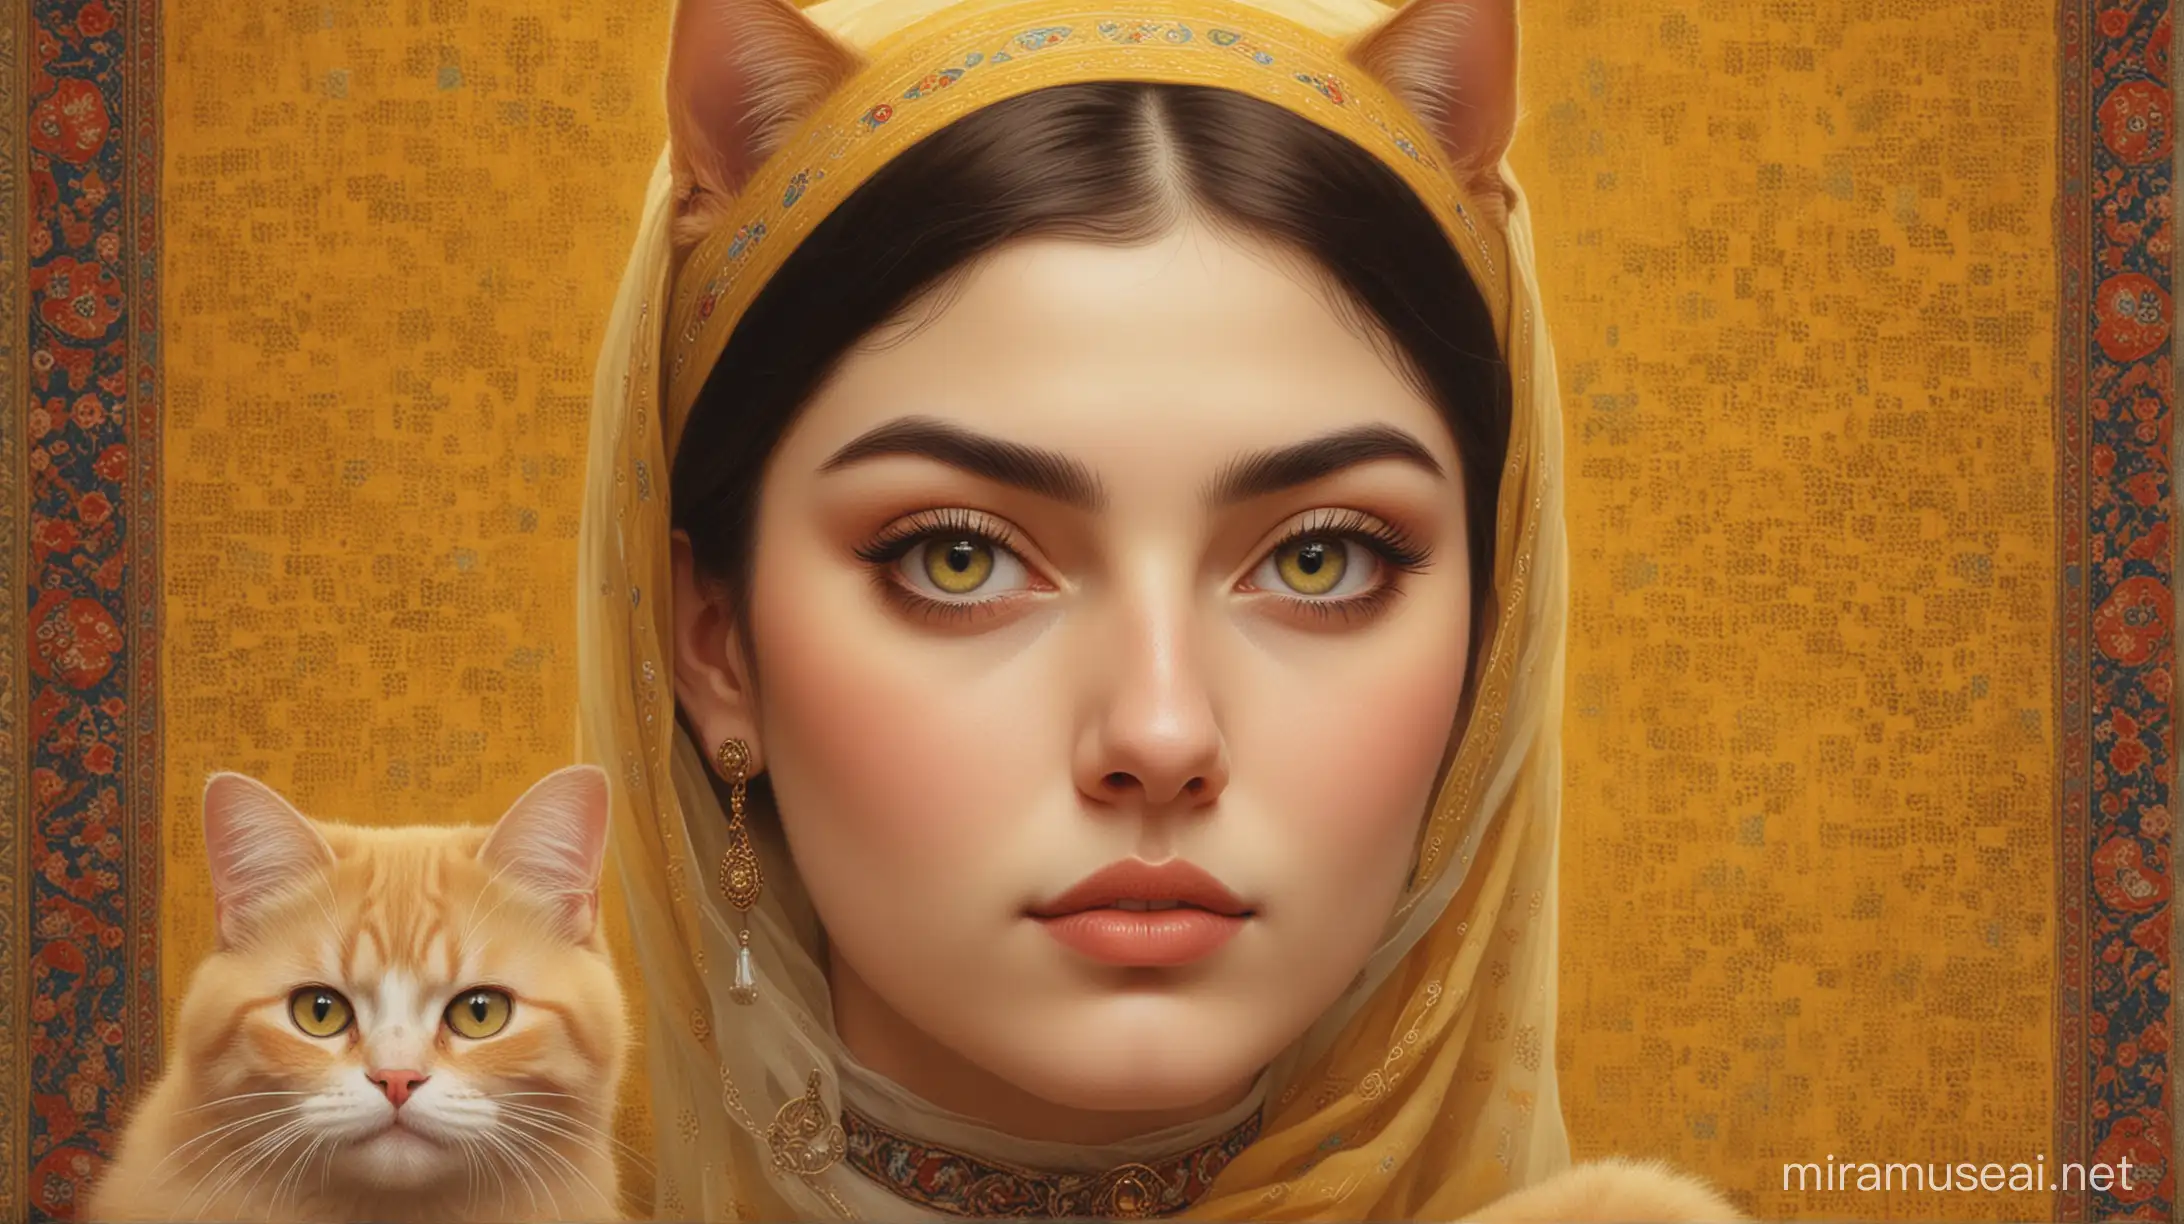 Persian Qajar Girl with Colorful CatTreats Paradise Evocative Art Collage